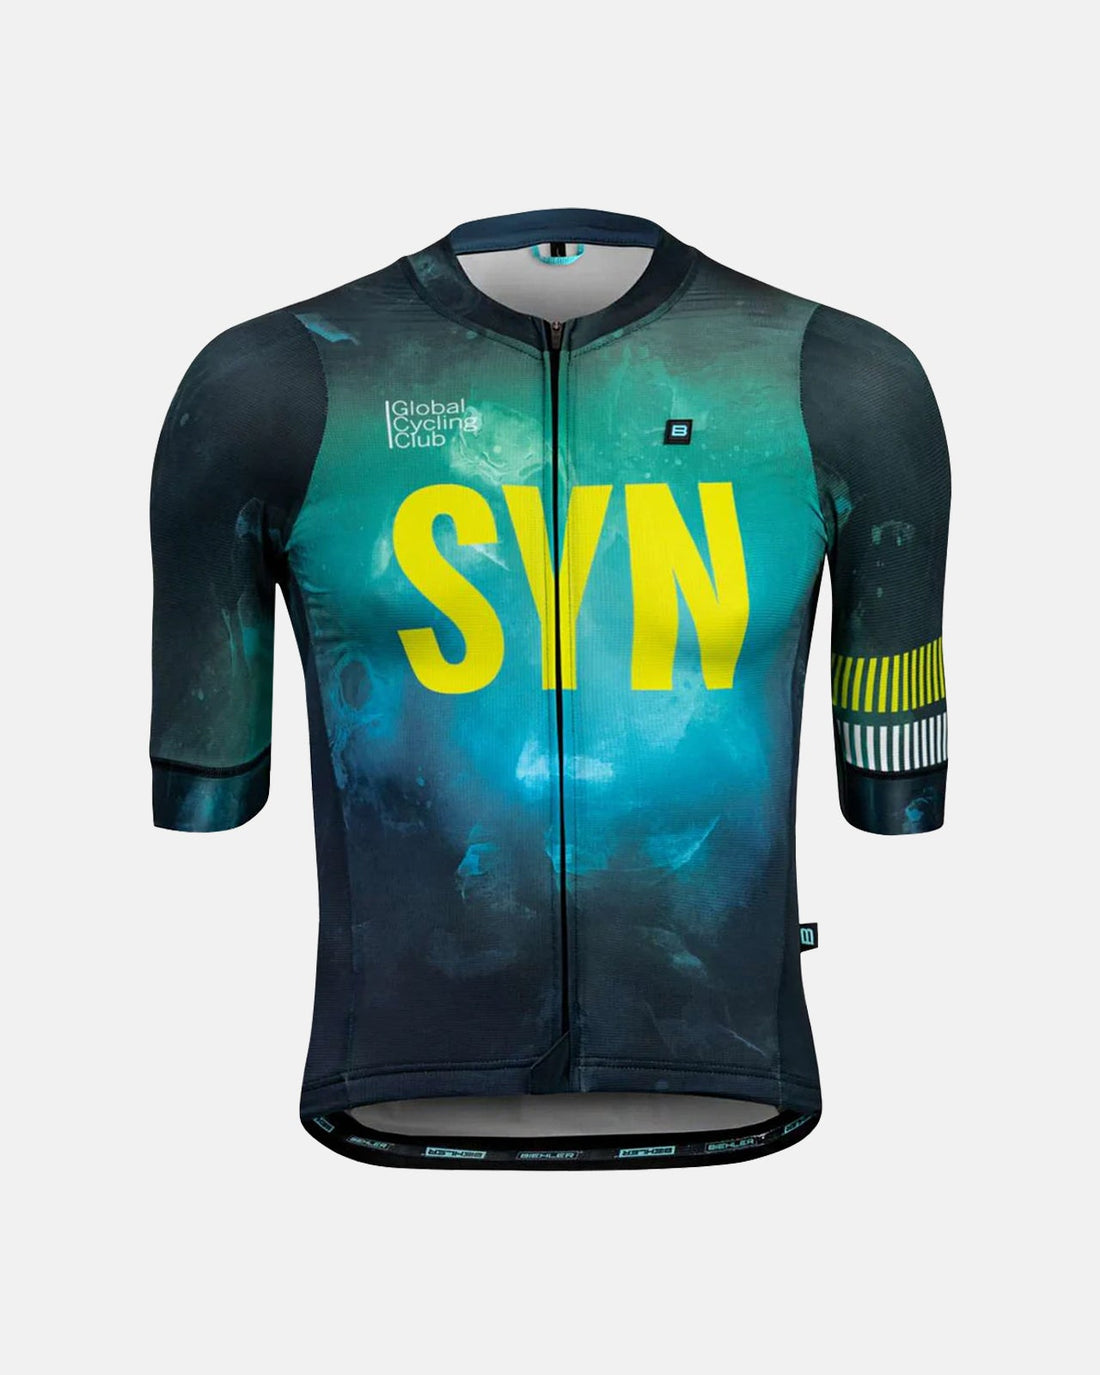 Syndicate Climber Jersey - Neon Space - Biehler